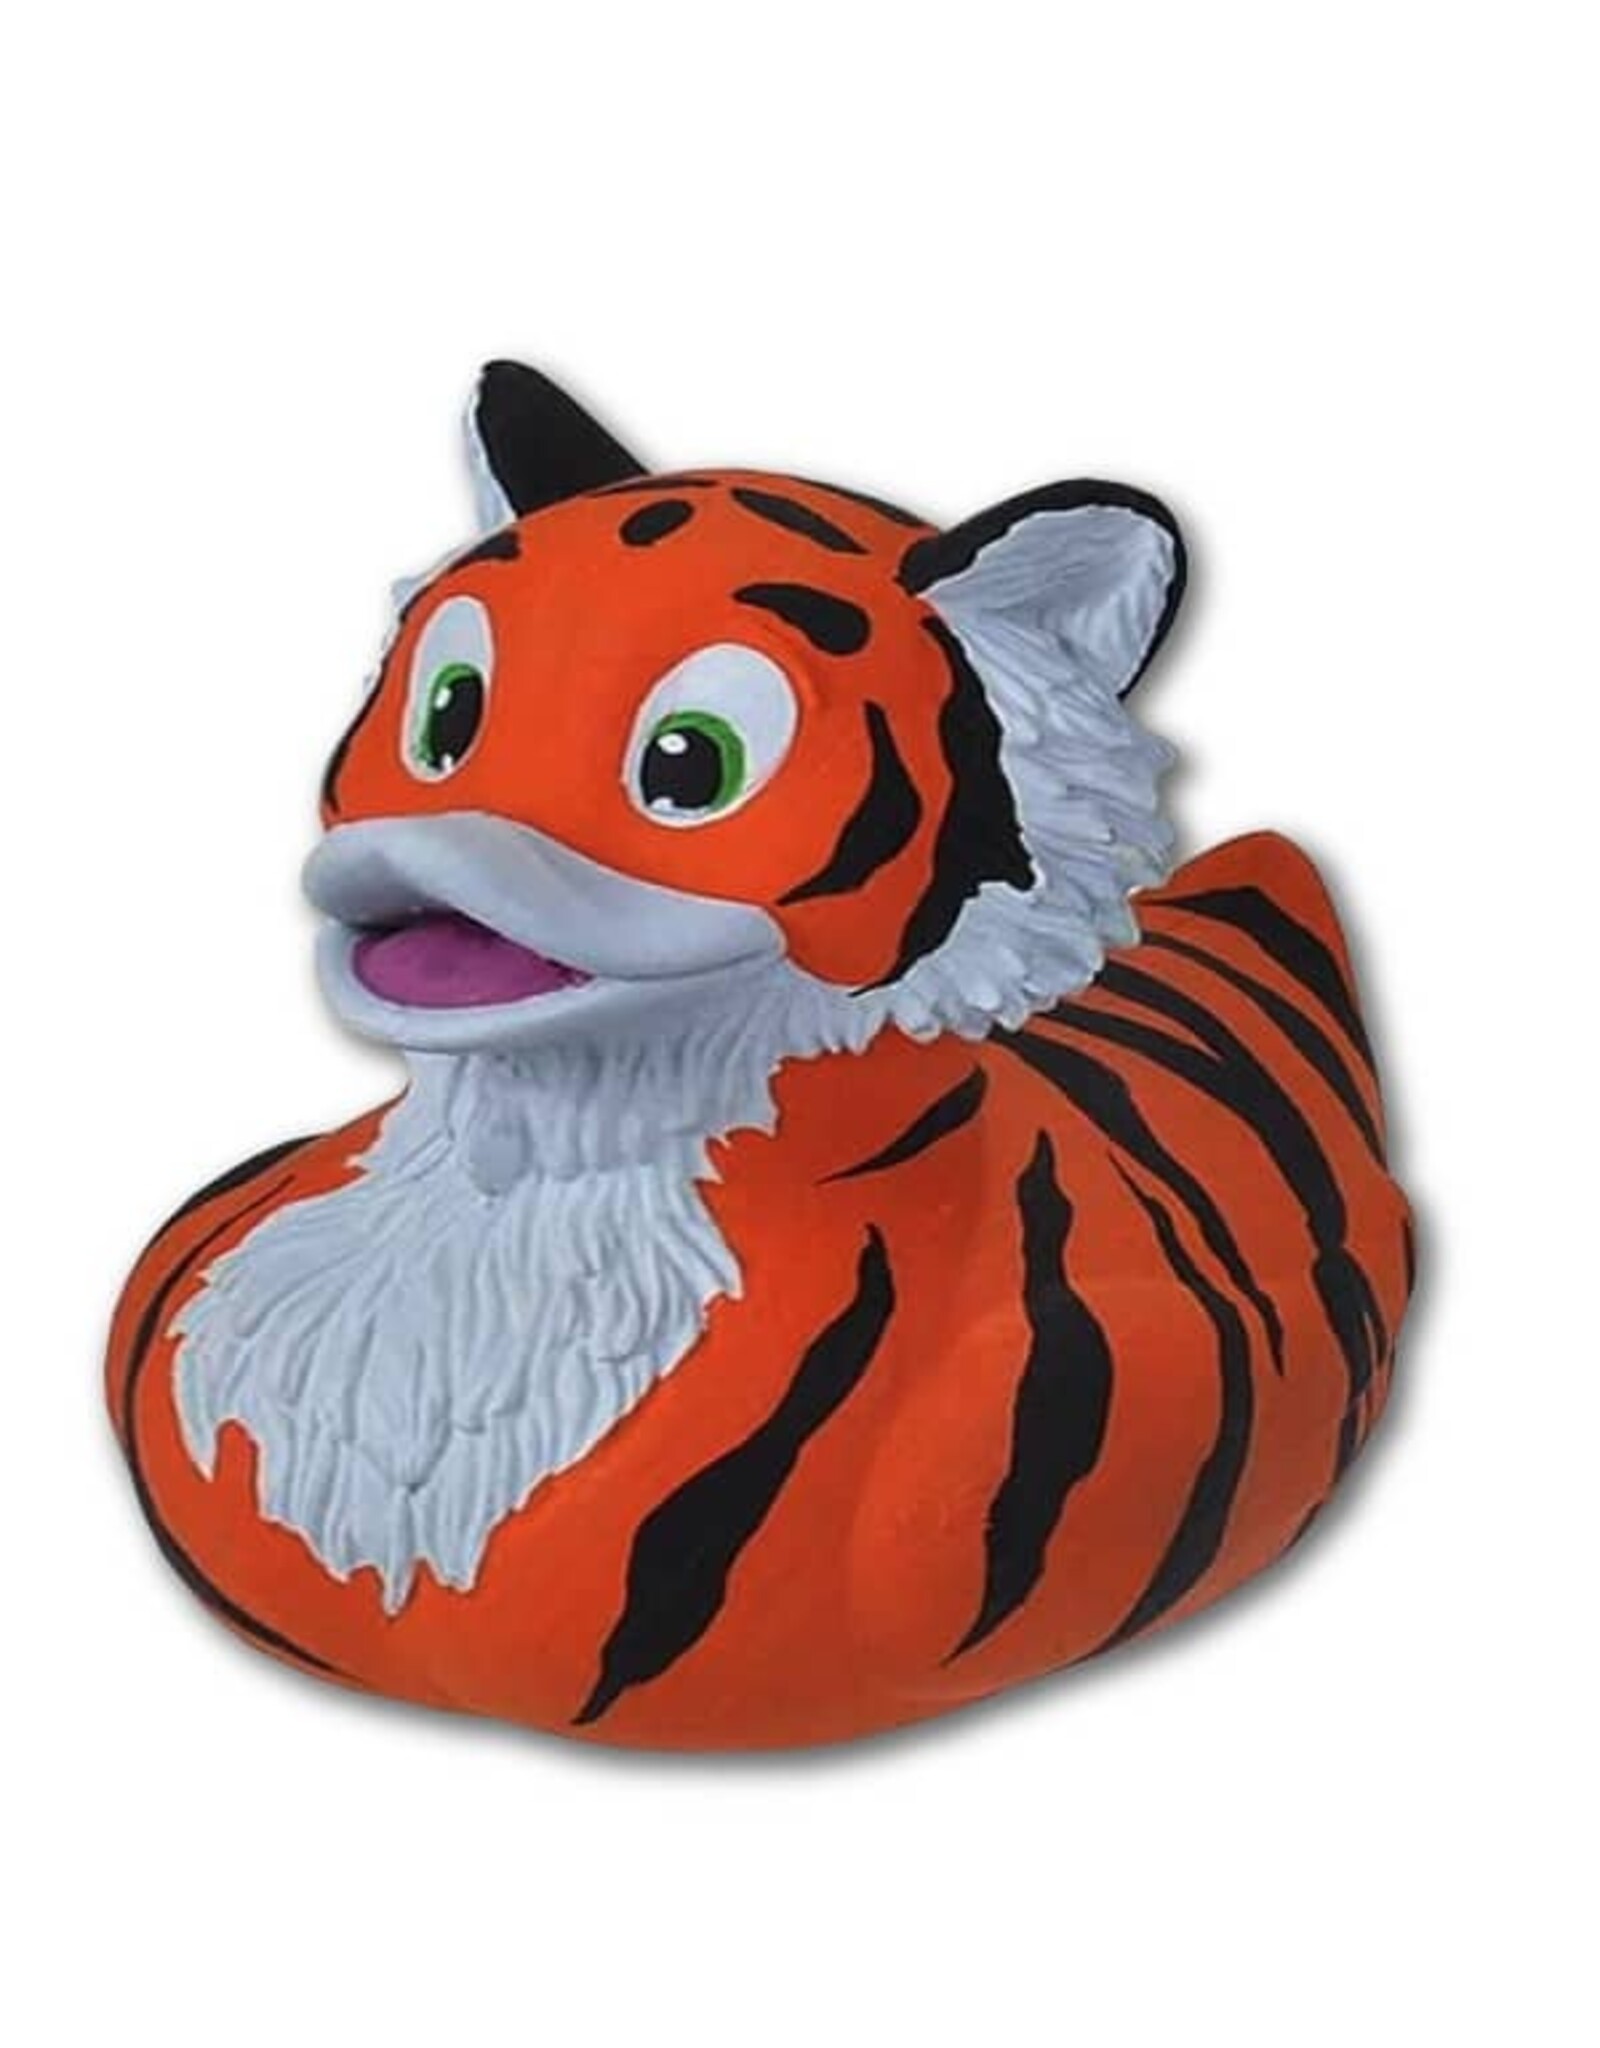 RUBBER DUCK TIGER